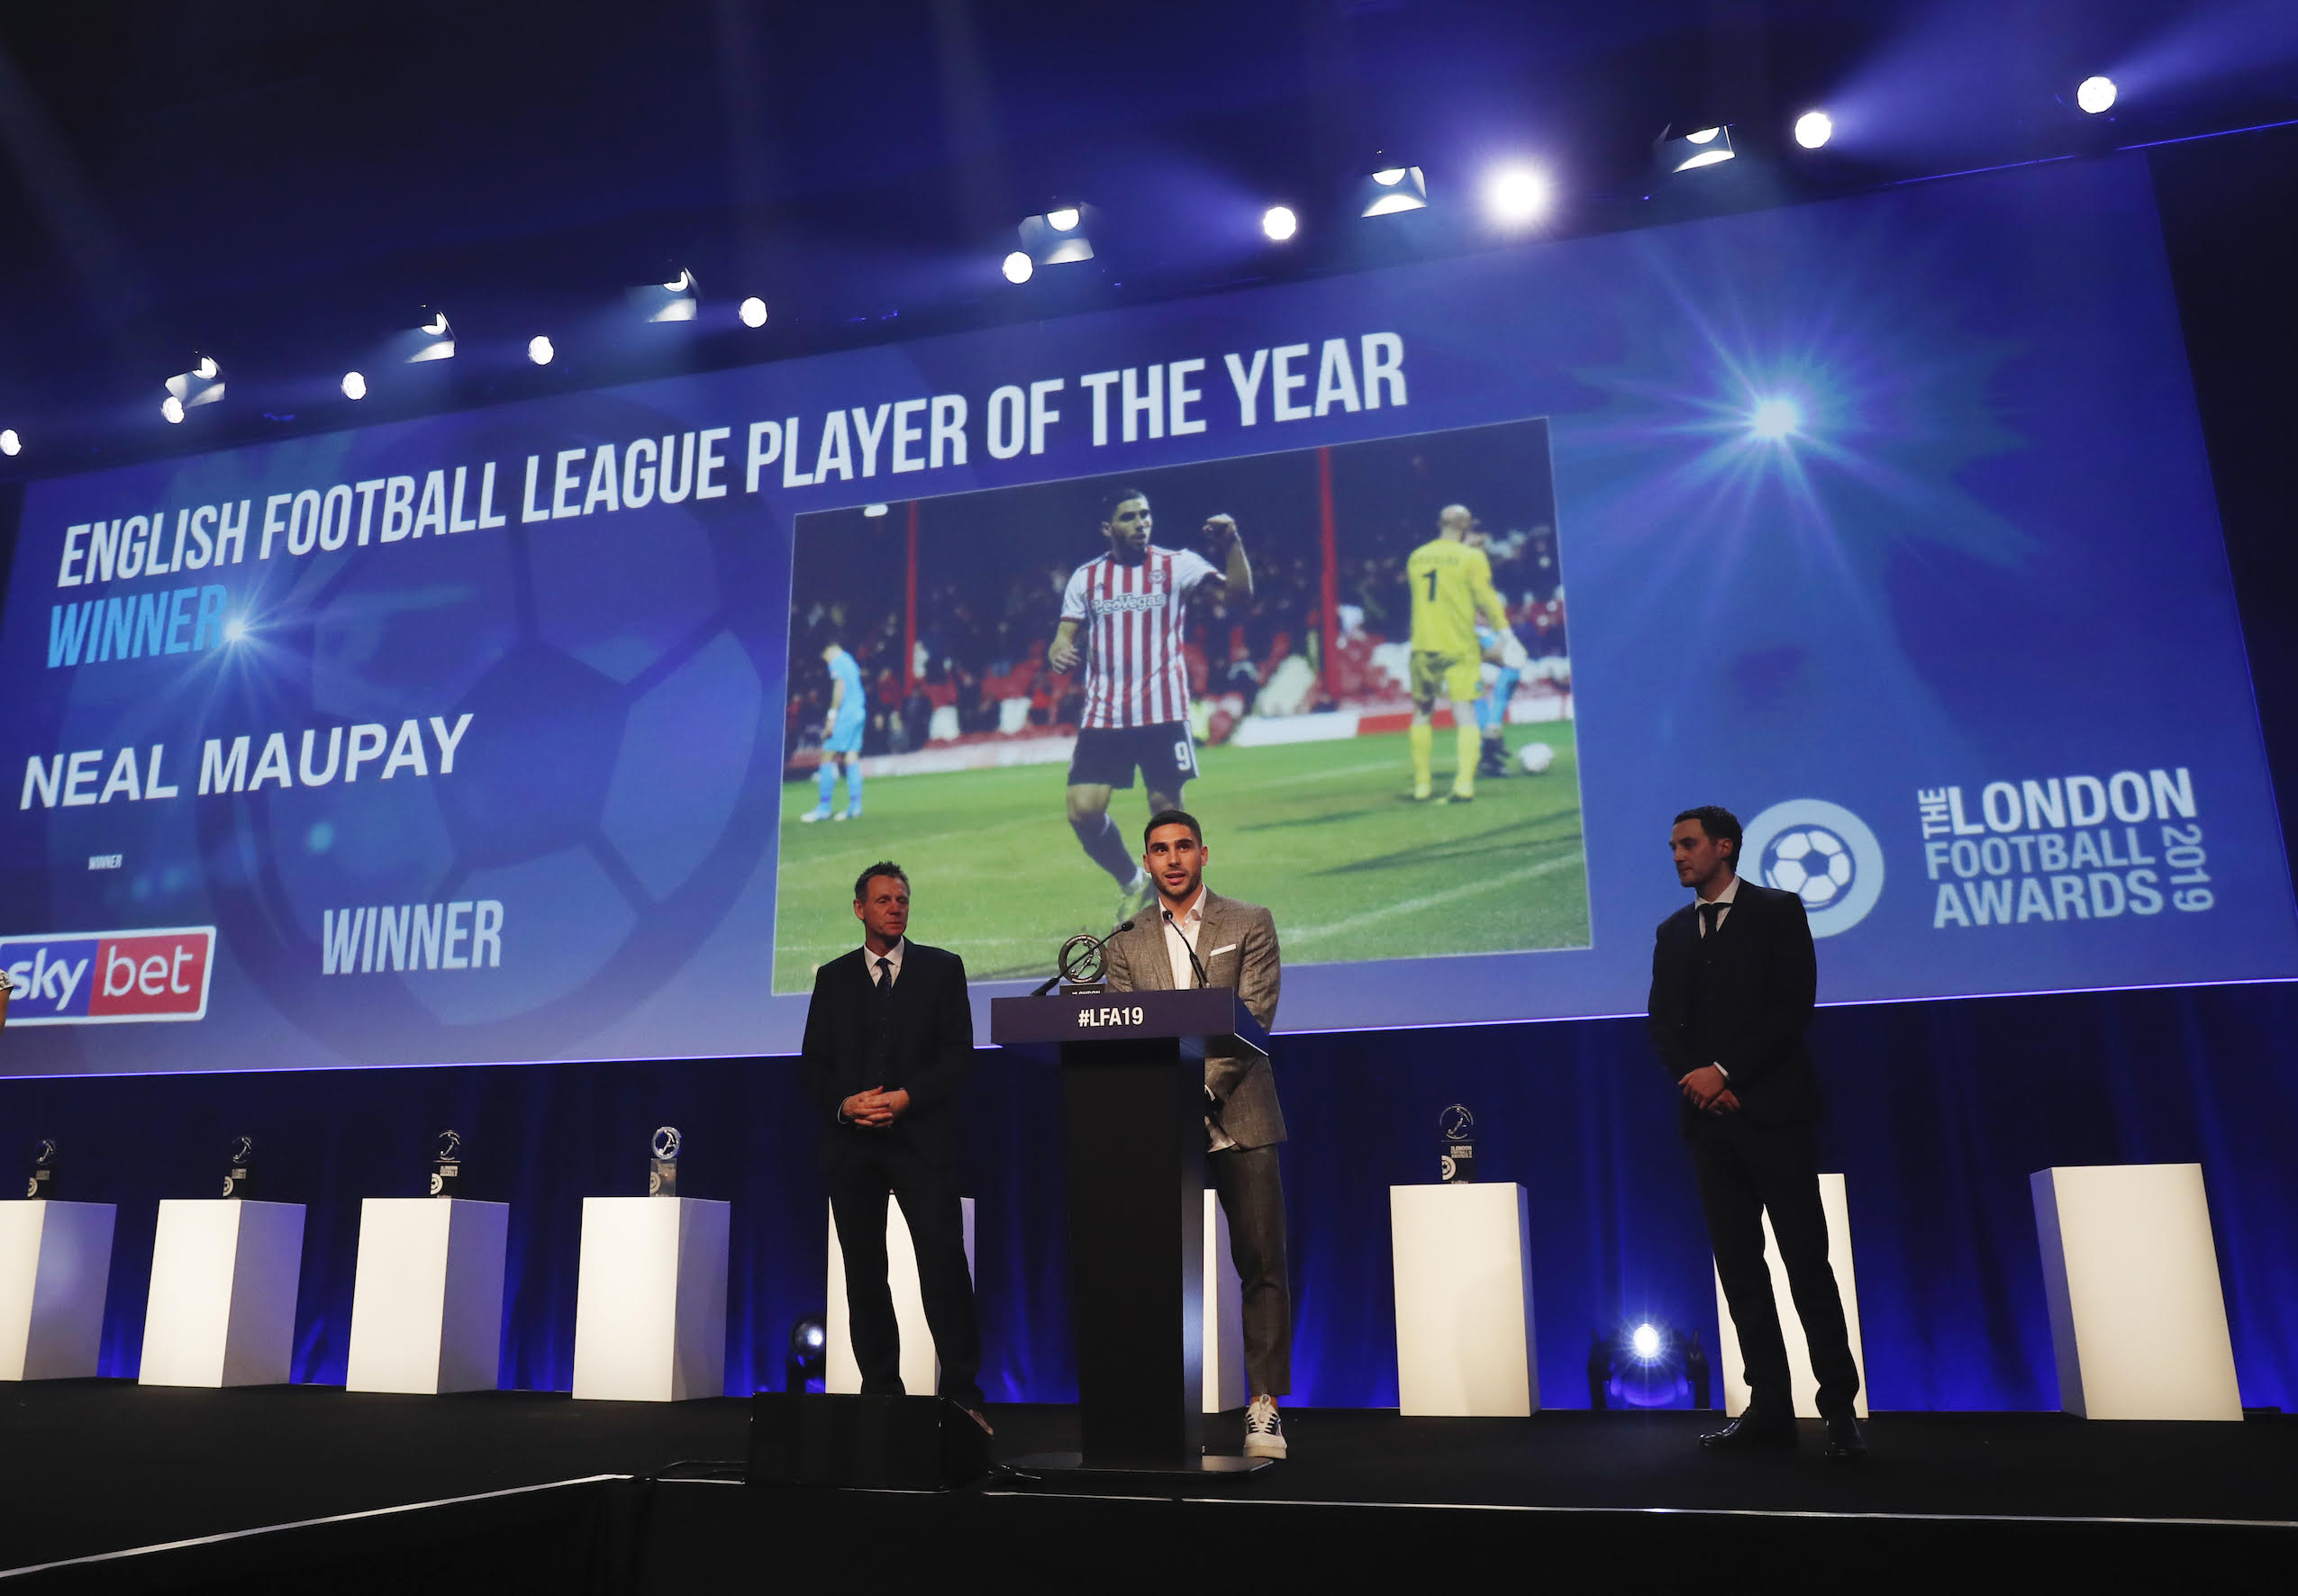 The London Football Awards returns for 2020 and relocates